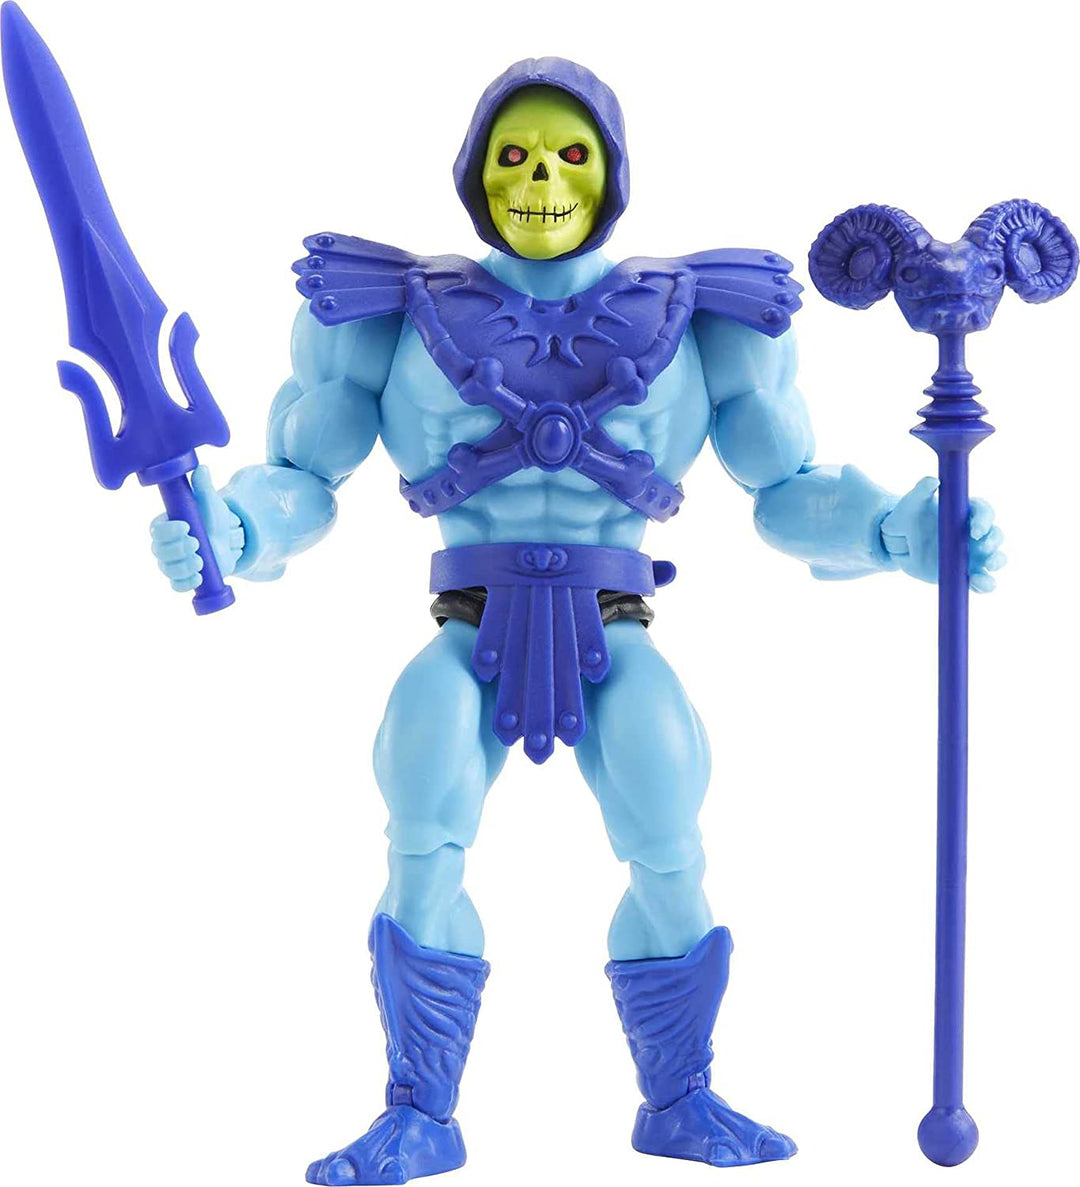 Masters of the Universe Origins Skeletor Action Figure, Battle Character for Storytelling Play and Display, Gift for 6 to 10 Year Olds and Adult Collectors